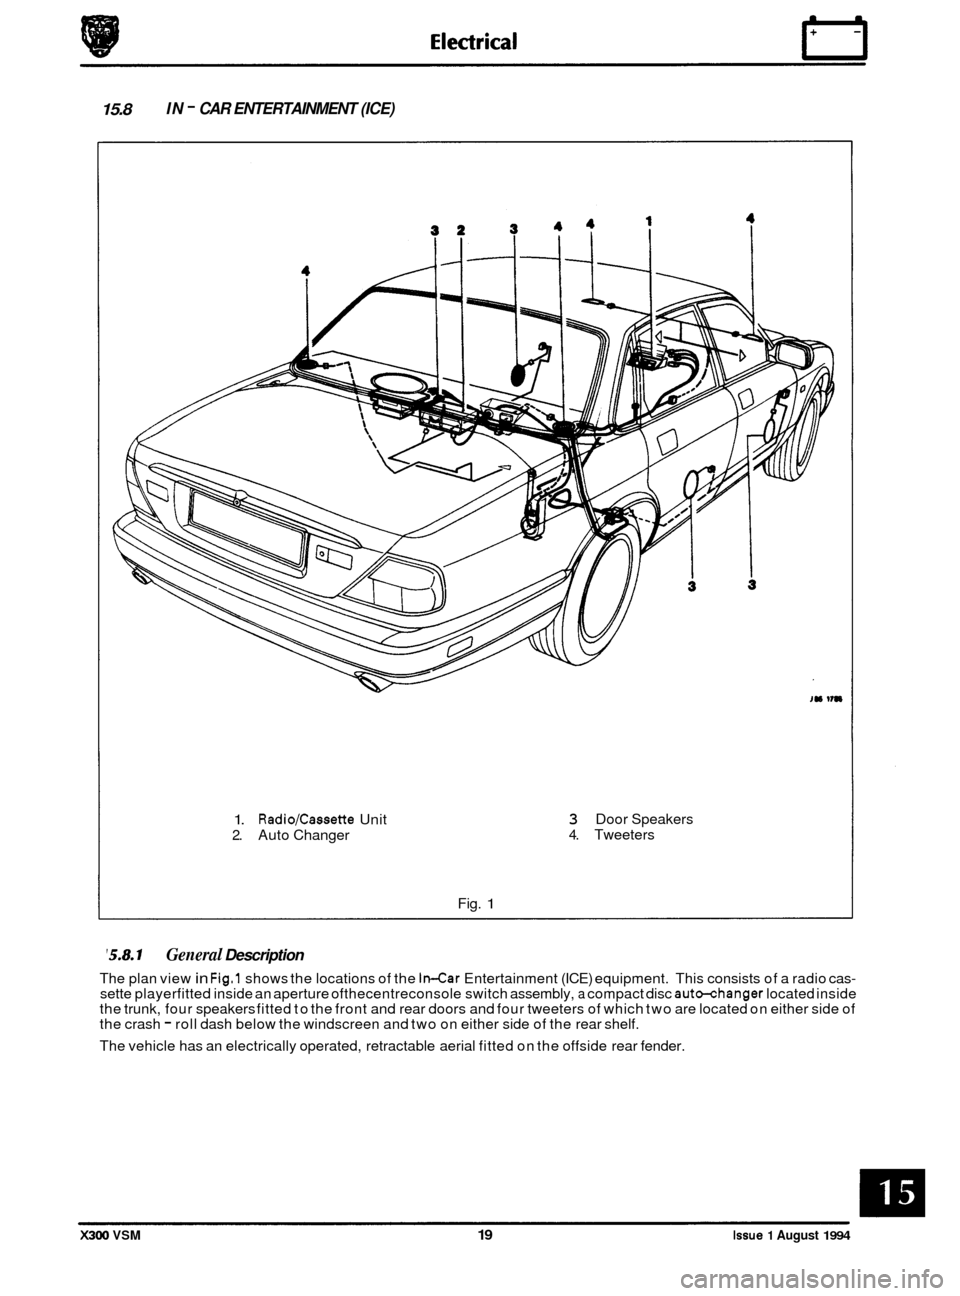 JAGUAR XJ6 1994 2.G Workshop Manual 15.8 IN - CAR ENTERTAINMENT  (ICE) 
0 
1. Radio/Cassette Unit 
2. Auto Changer 
Fig. 
1 
3 Door Speakers 
4. Tweeters 
5.8.1 General Description 
The plan  view in Fig.1 shows  the locations  of the 